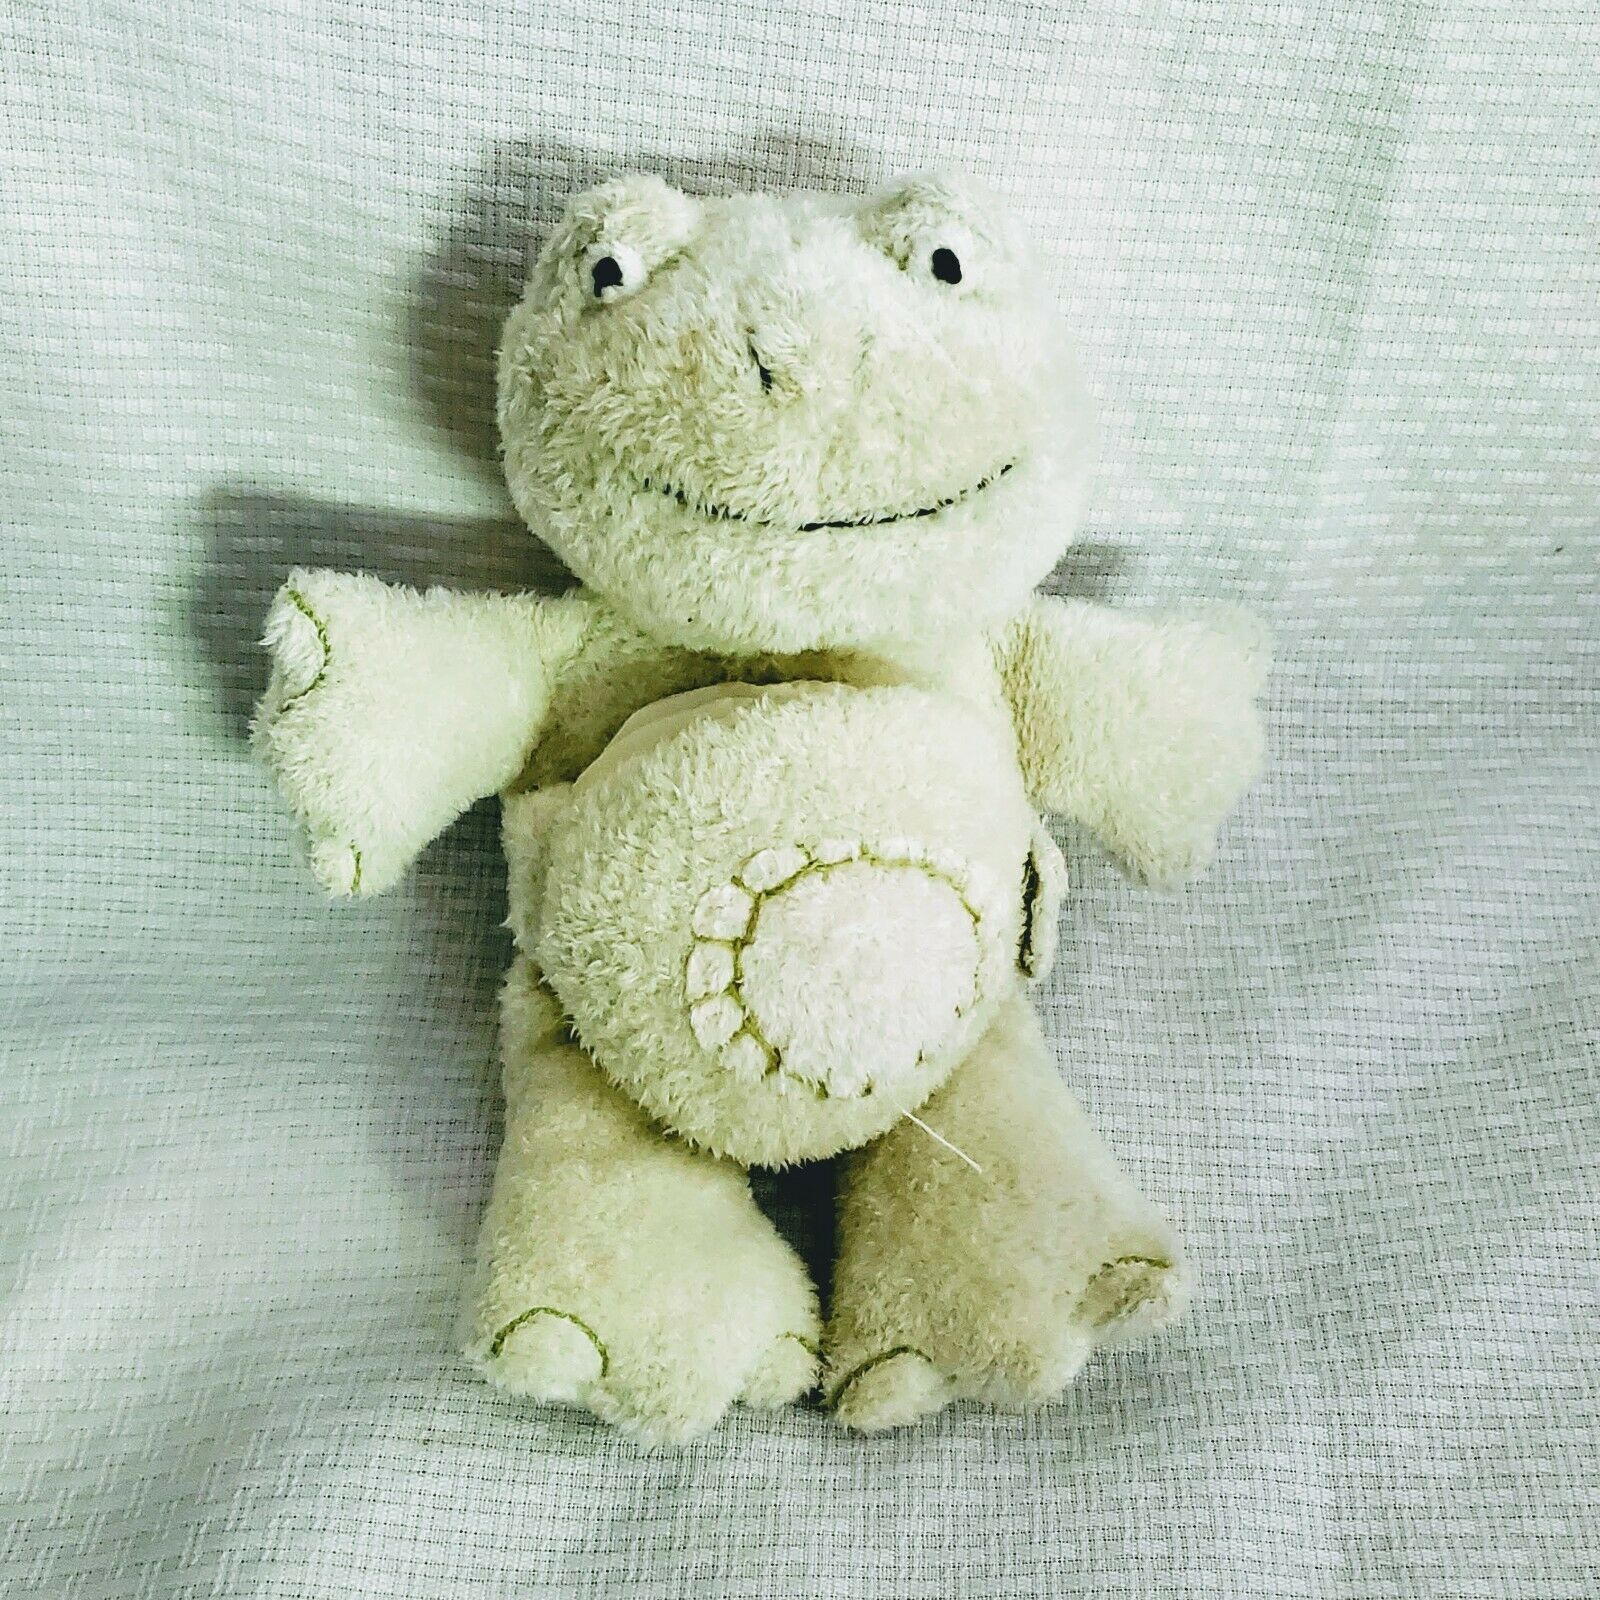 Pottery Barn Kids Frog Toy Light Green Plush Stuffed ABC Belly Book Froggy - $12.37